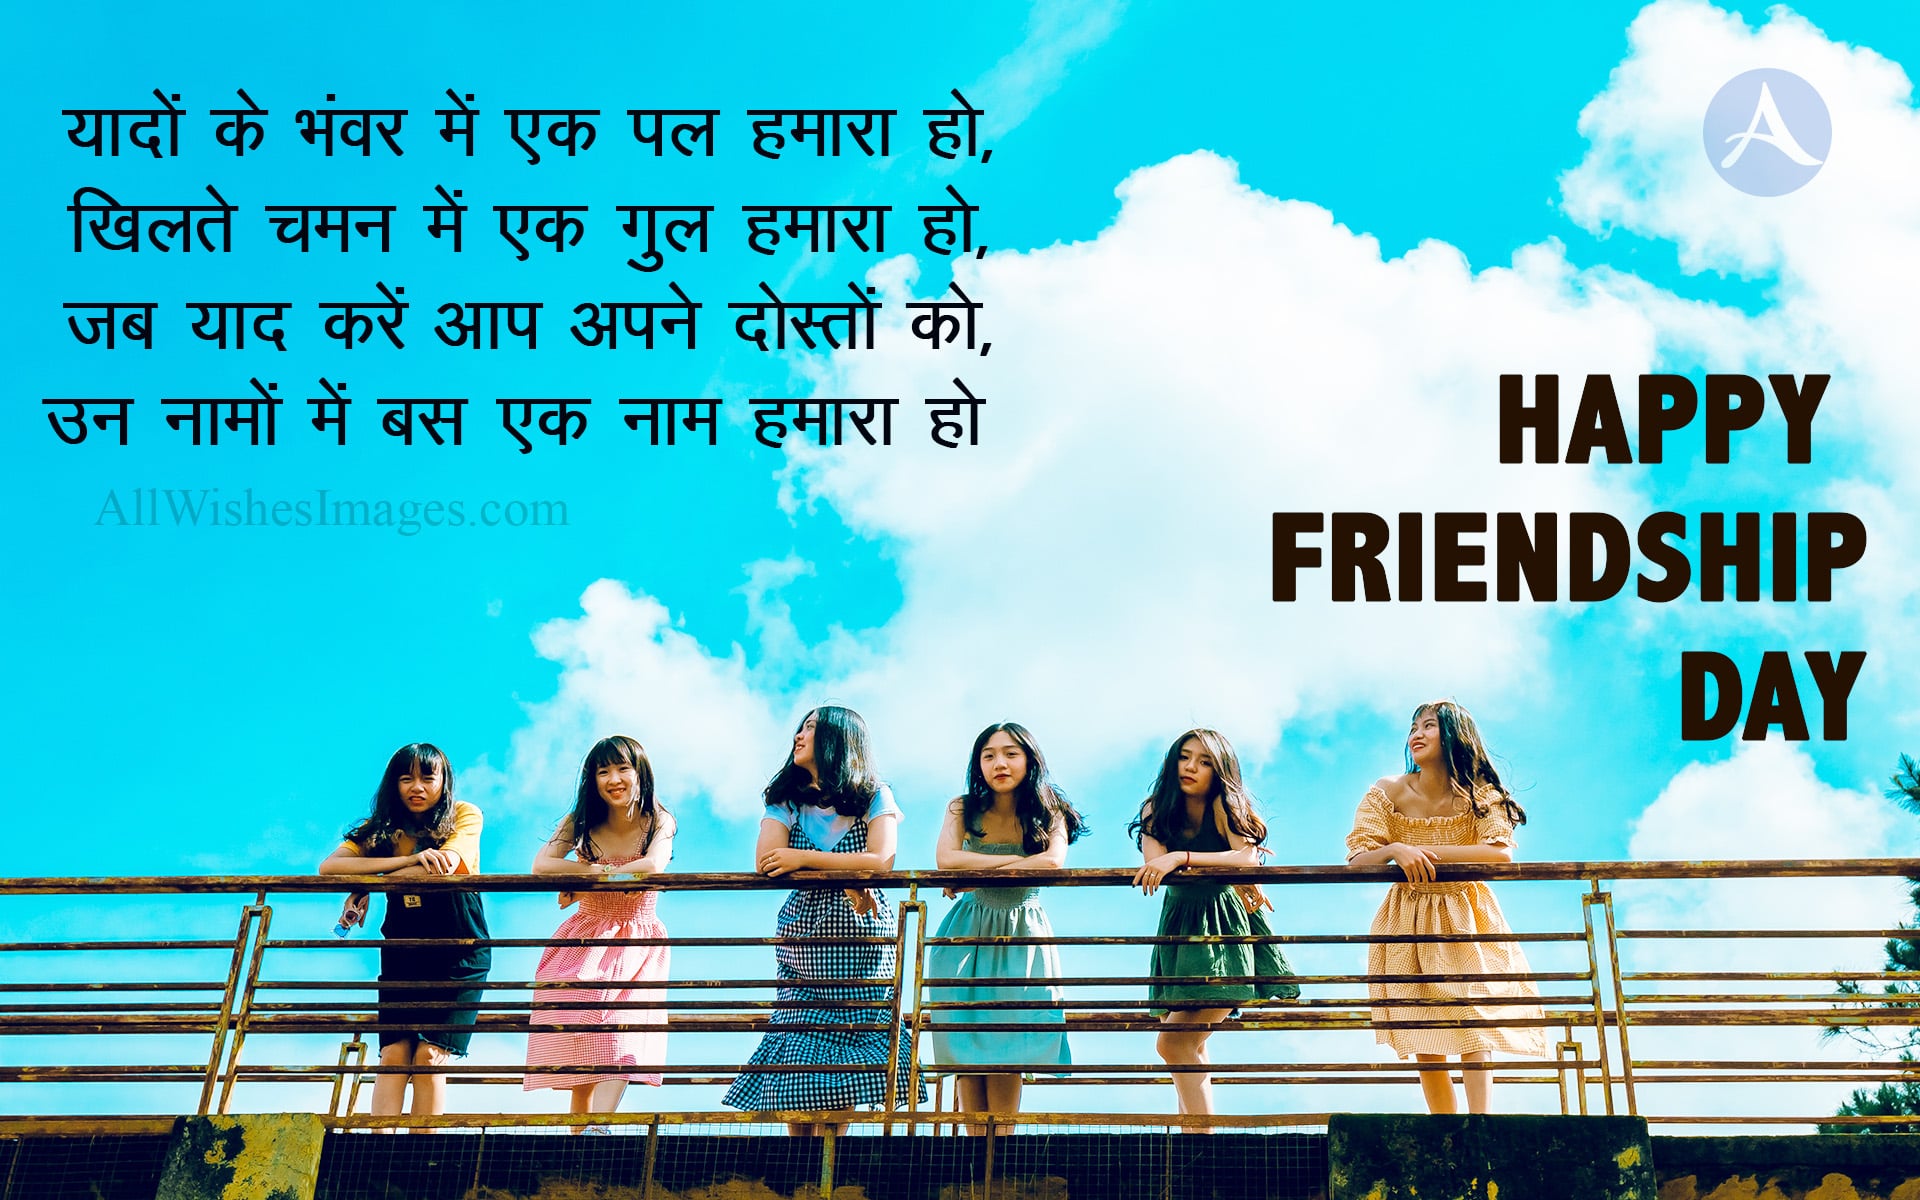 Friendship Day Shayari In Hindi With Images (2022) - Best Friendship Day  Shayari Images in Hindi Languague - All Wishes Images - Images for WhatsApp